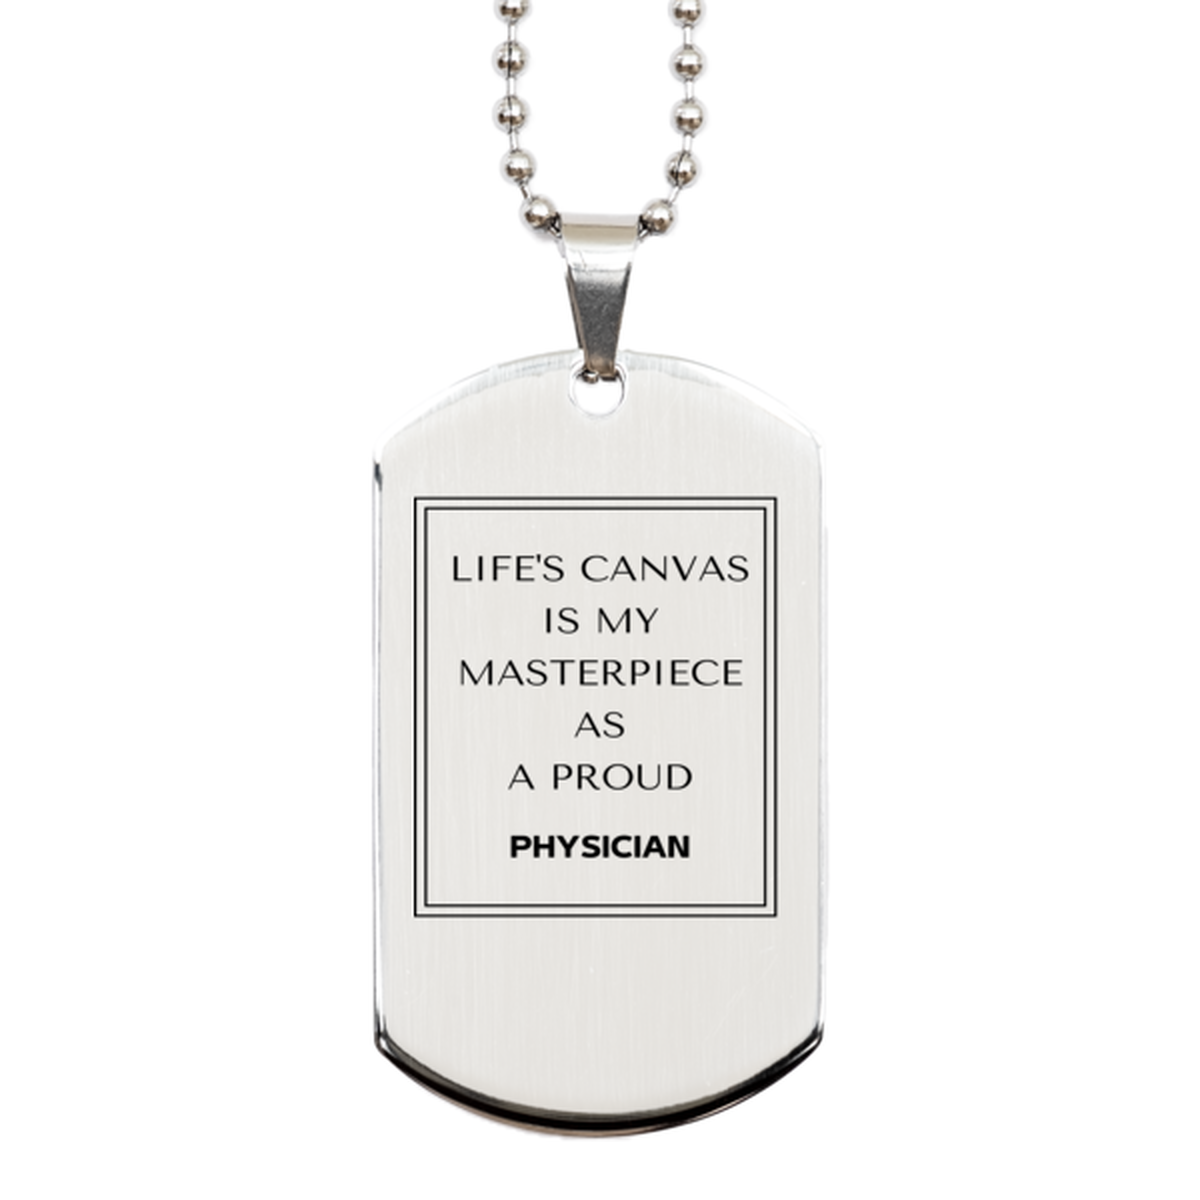 Proud Physician Gifts, Life's canvas is my masterpiece, Epic Birthday Christmas Unique Silver Dog Tag For Physician, Coworkers, Men, Women, Friends